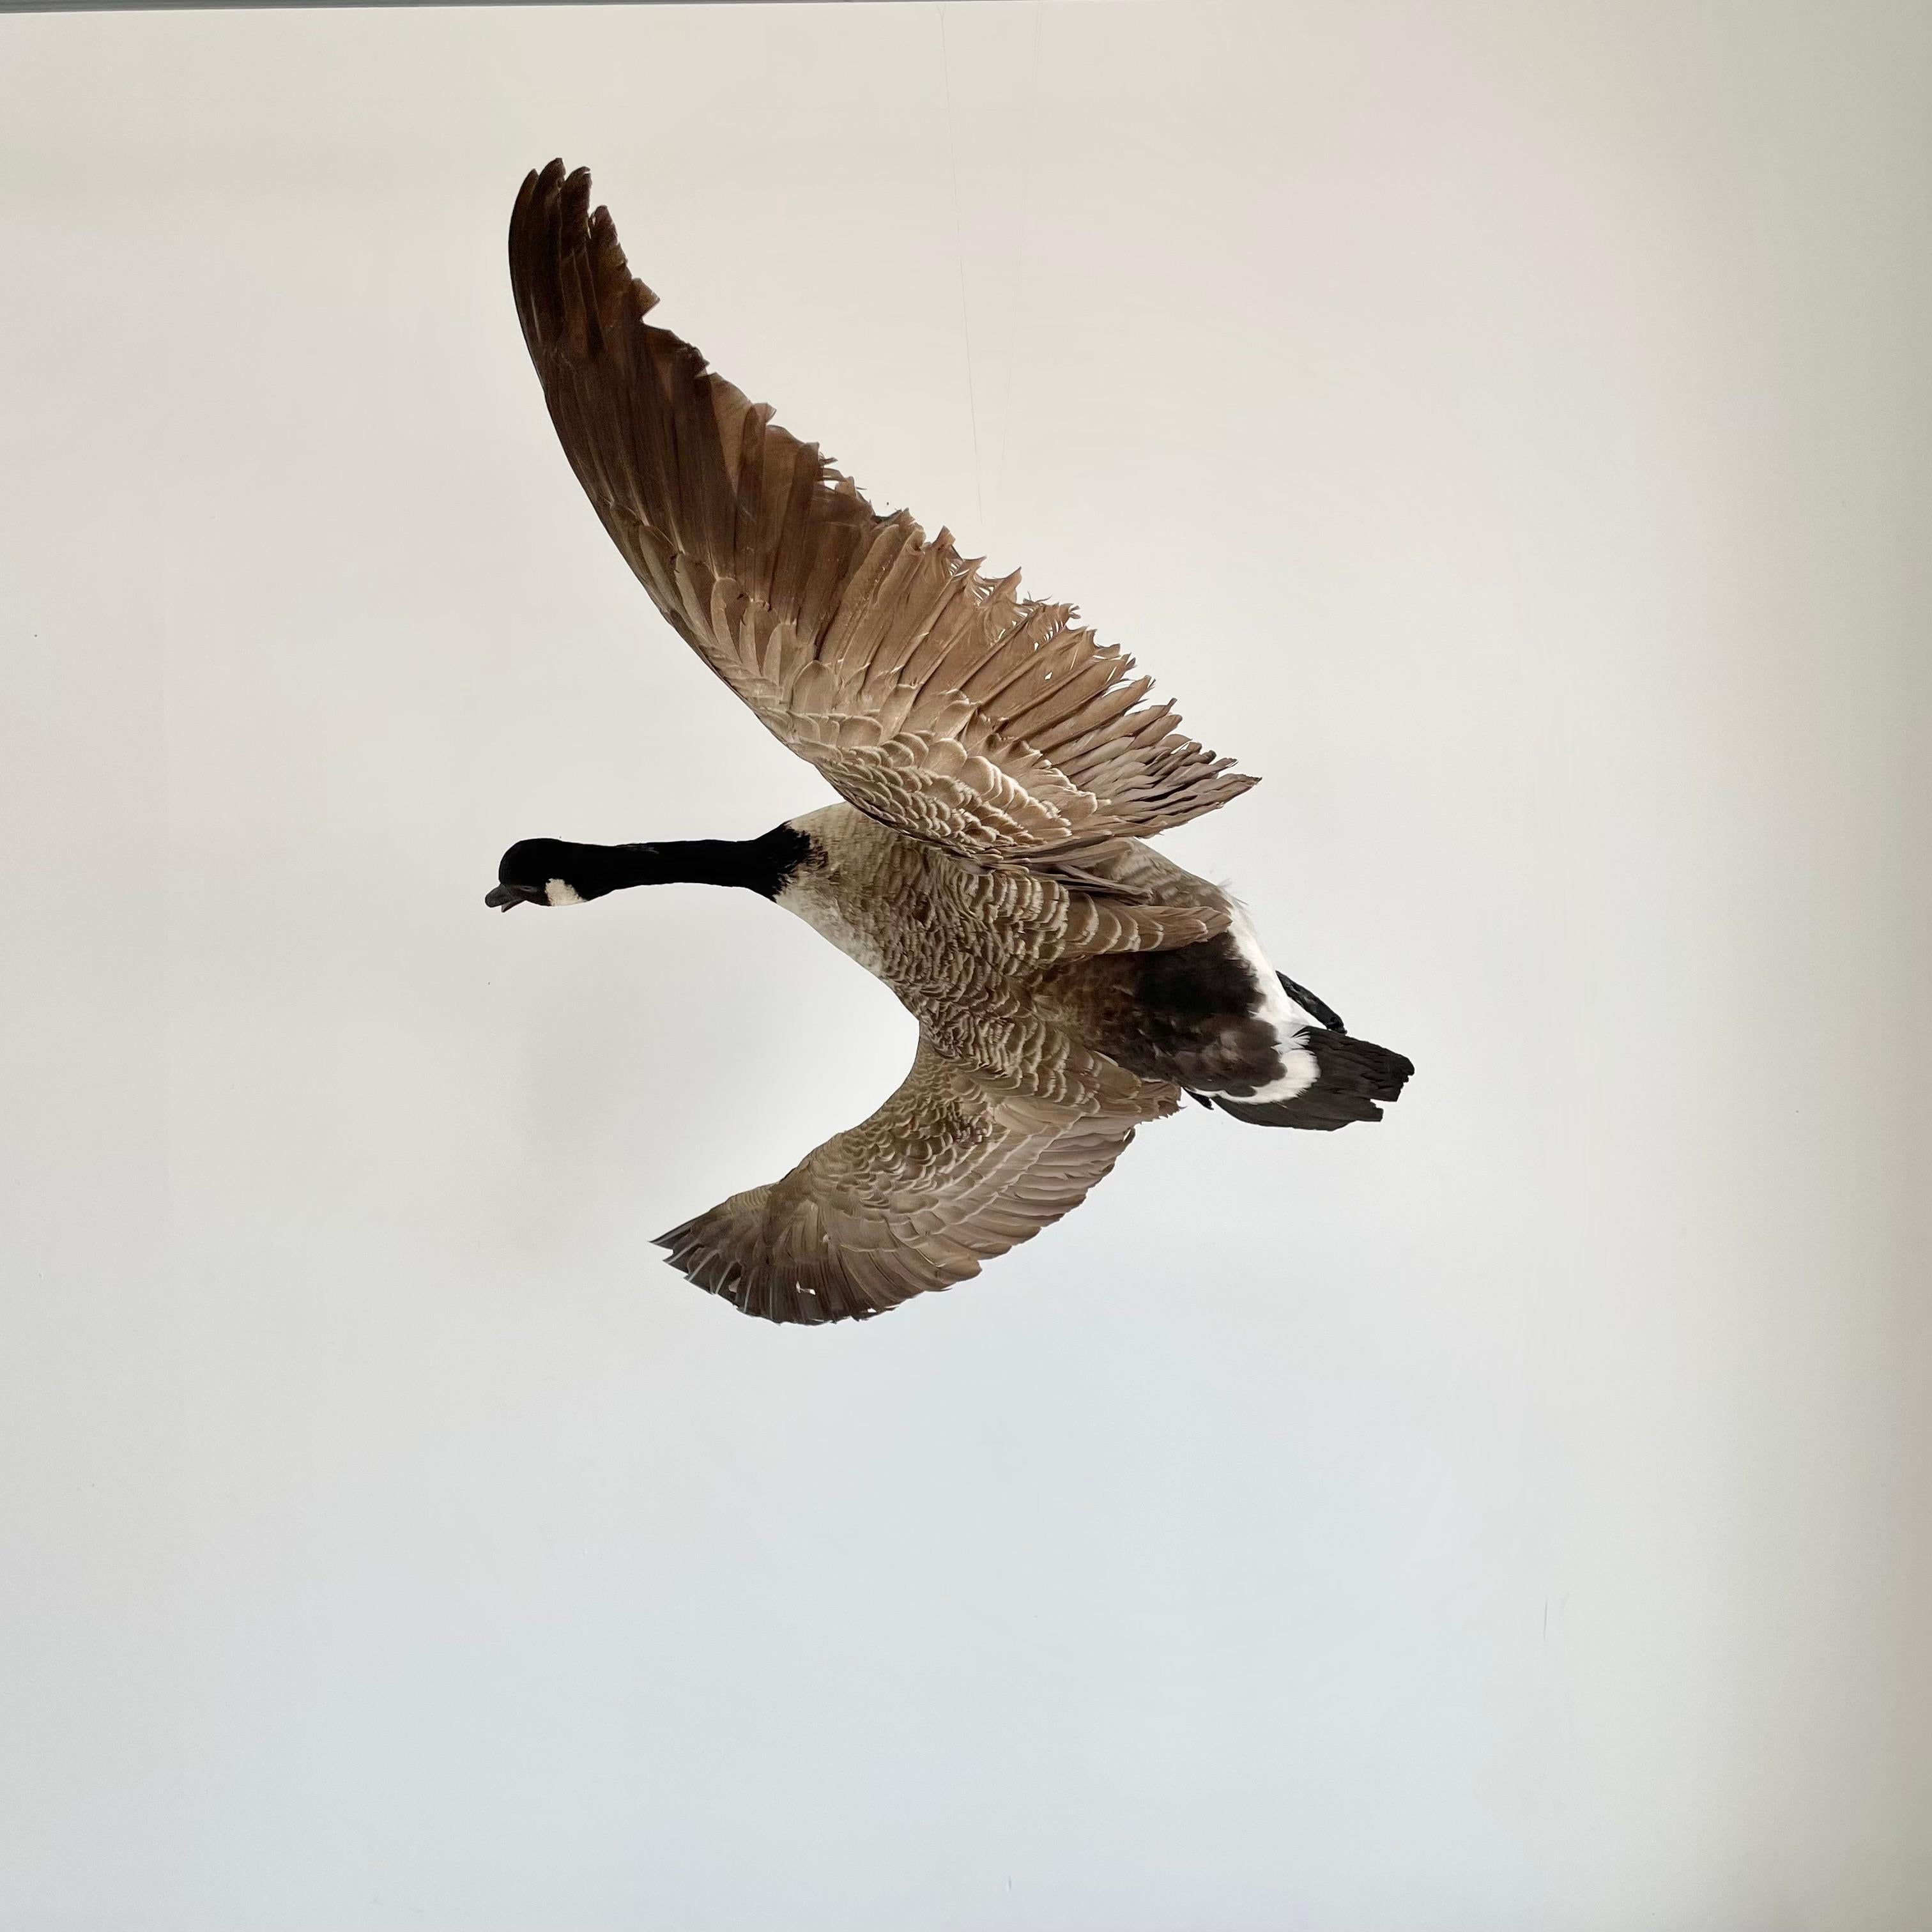 Taxidermy goose in flight. Beautiful, classic coloring with feathers in black, brown and white. Good overall condition. Good presence.